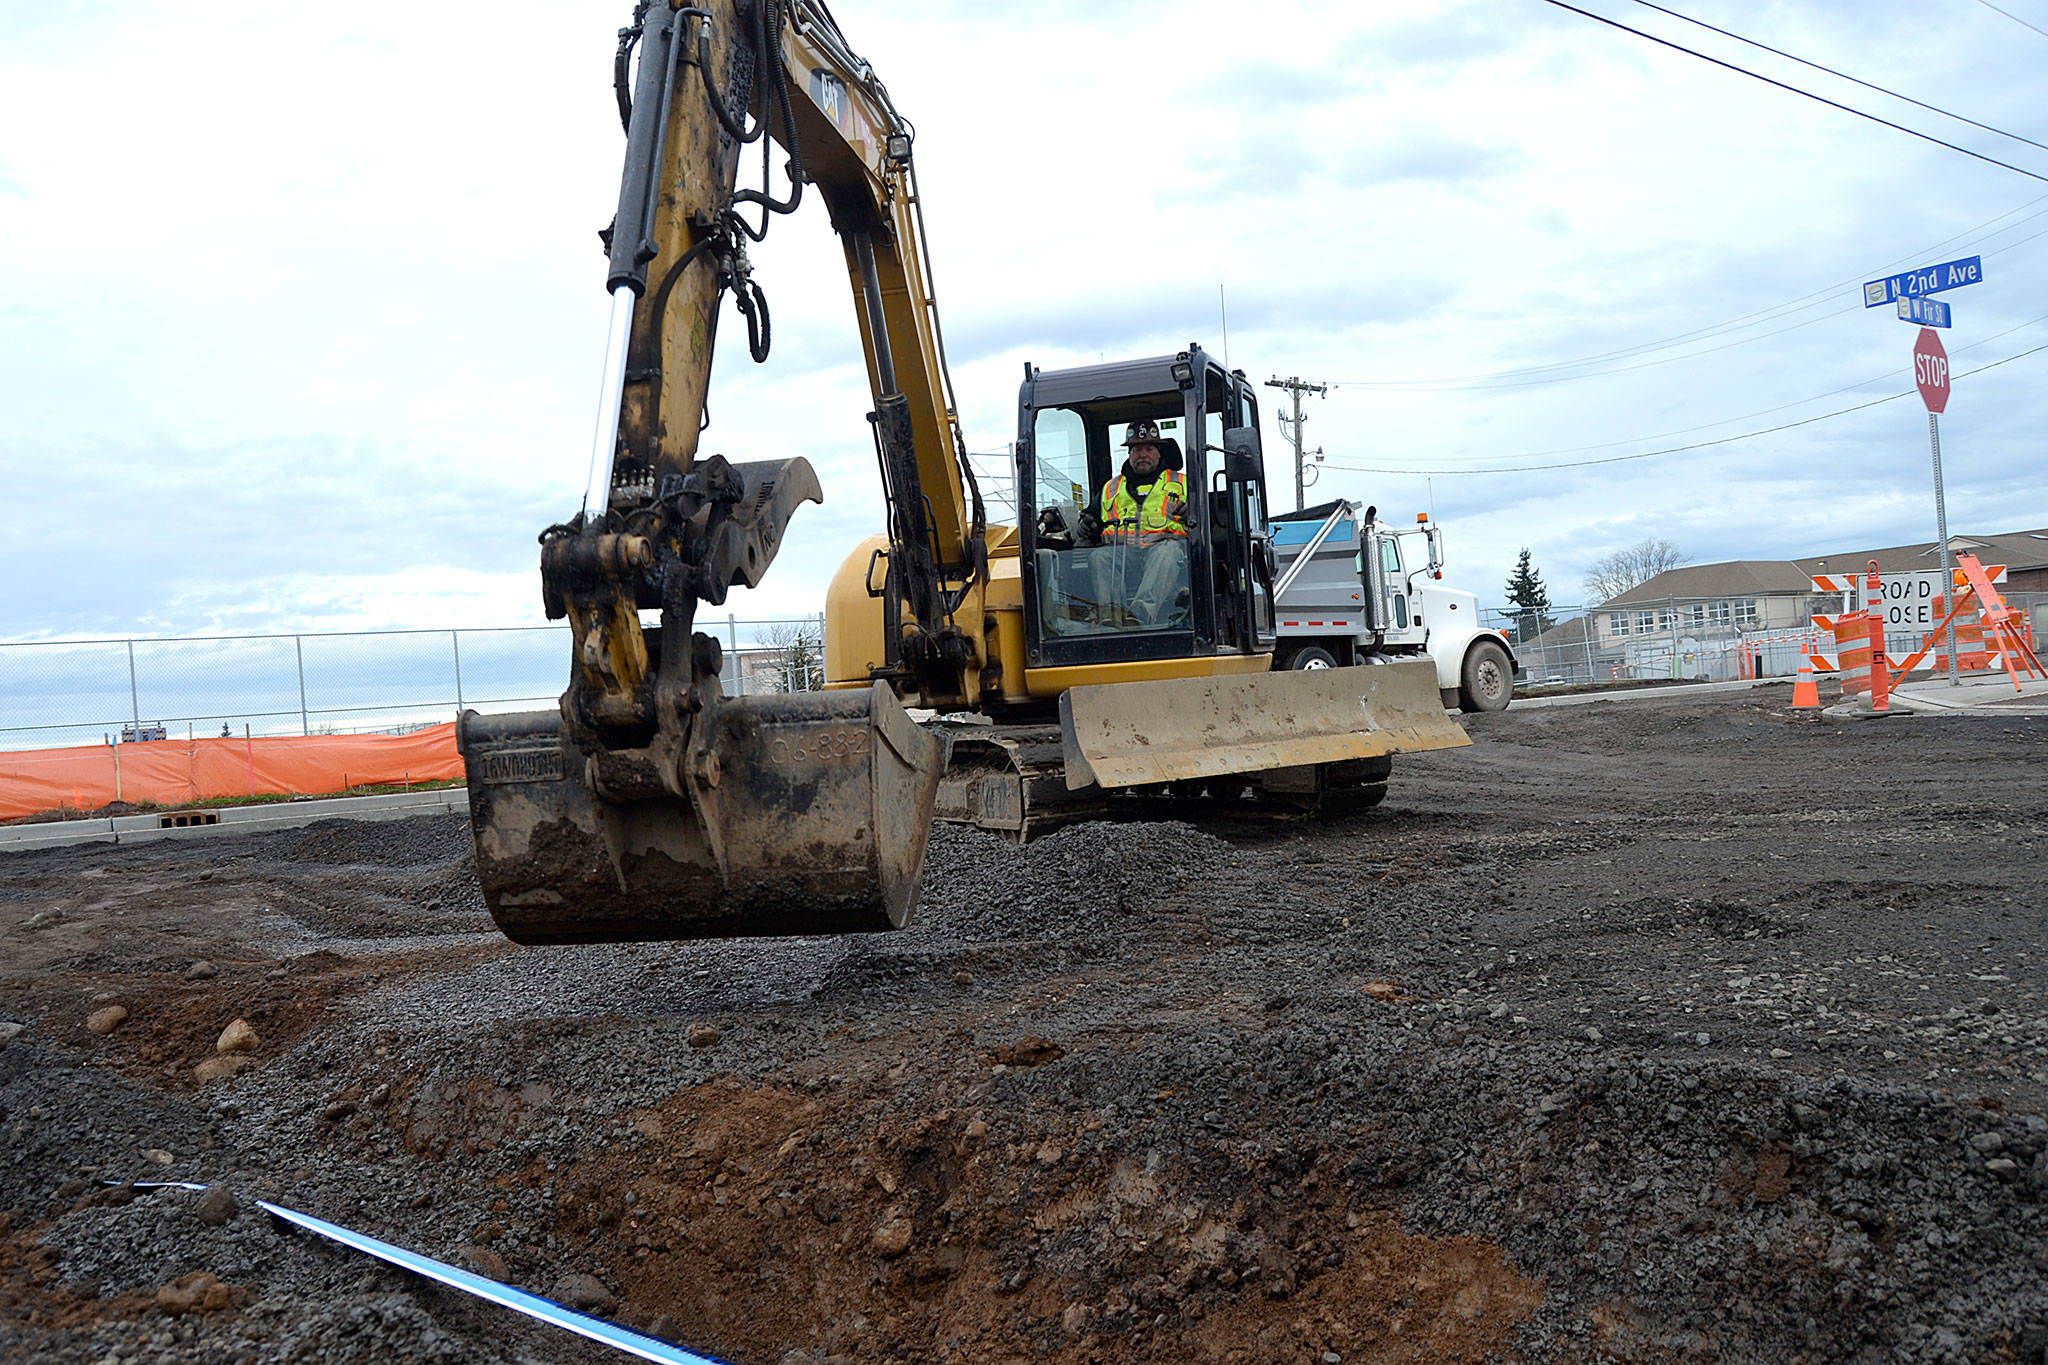 Work continued on Monday along West Fir Street after snow delayed Interwest Construction for a week. Here, crewmen cover irrigation pipeline at the Second Avenue and Fir Street intersection. Sequim Gazette photo by Matthew Nash